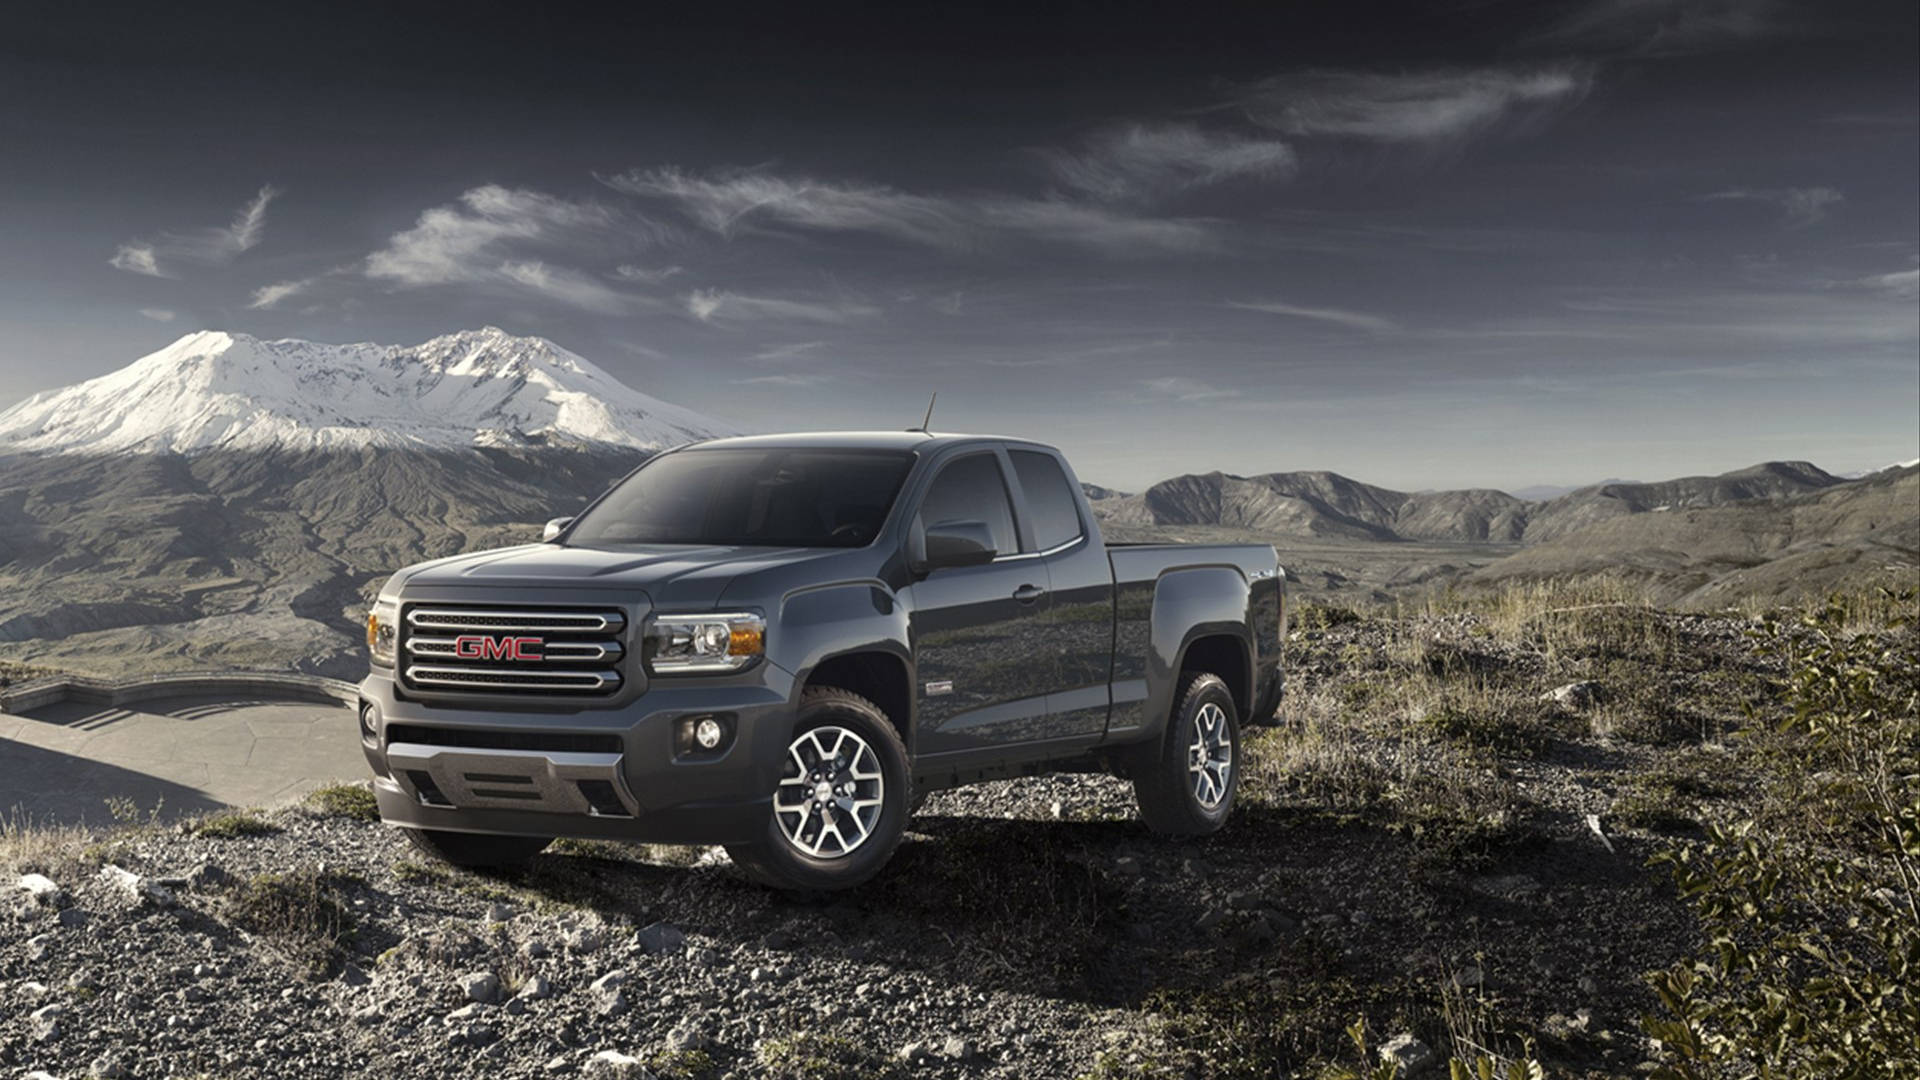 Gmc On A Rocky Road Background